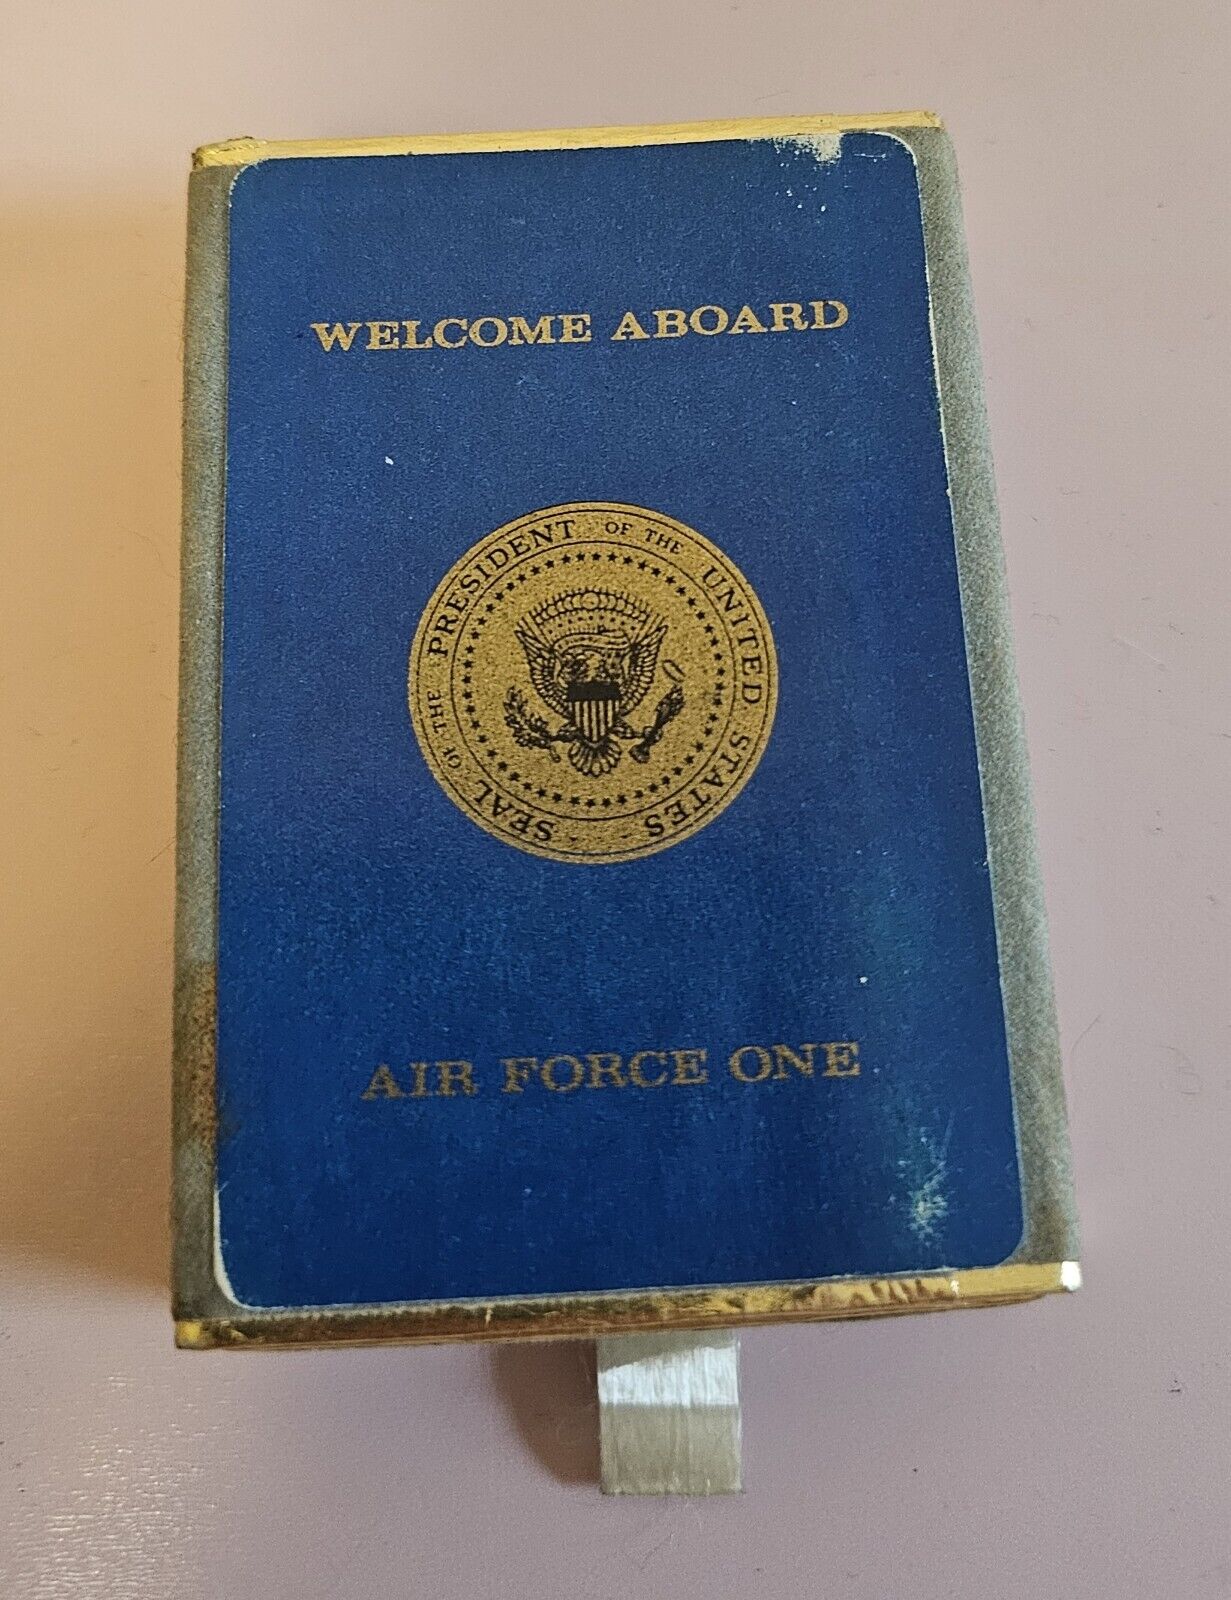 Vintage  AIR FORCE ONE  Playing Cards  WELCOME ABOARD  Pack of Cards